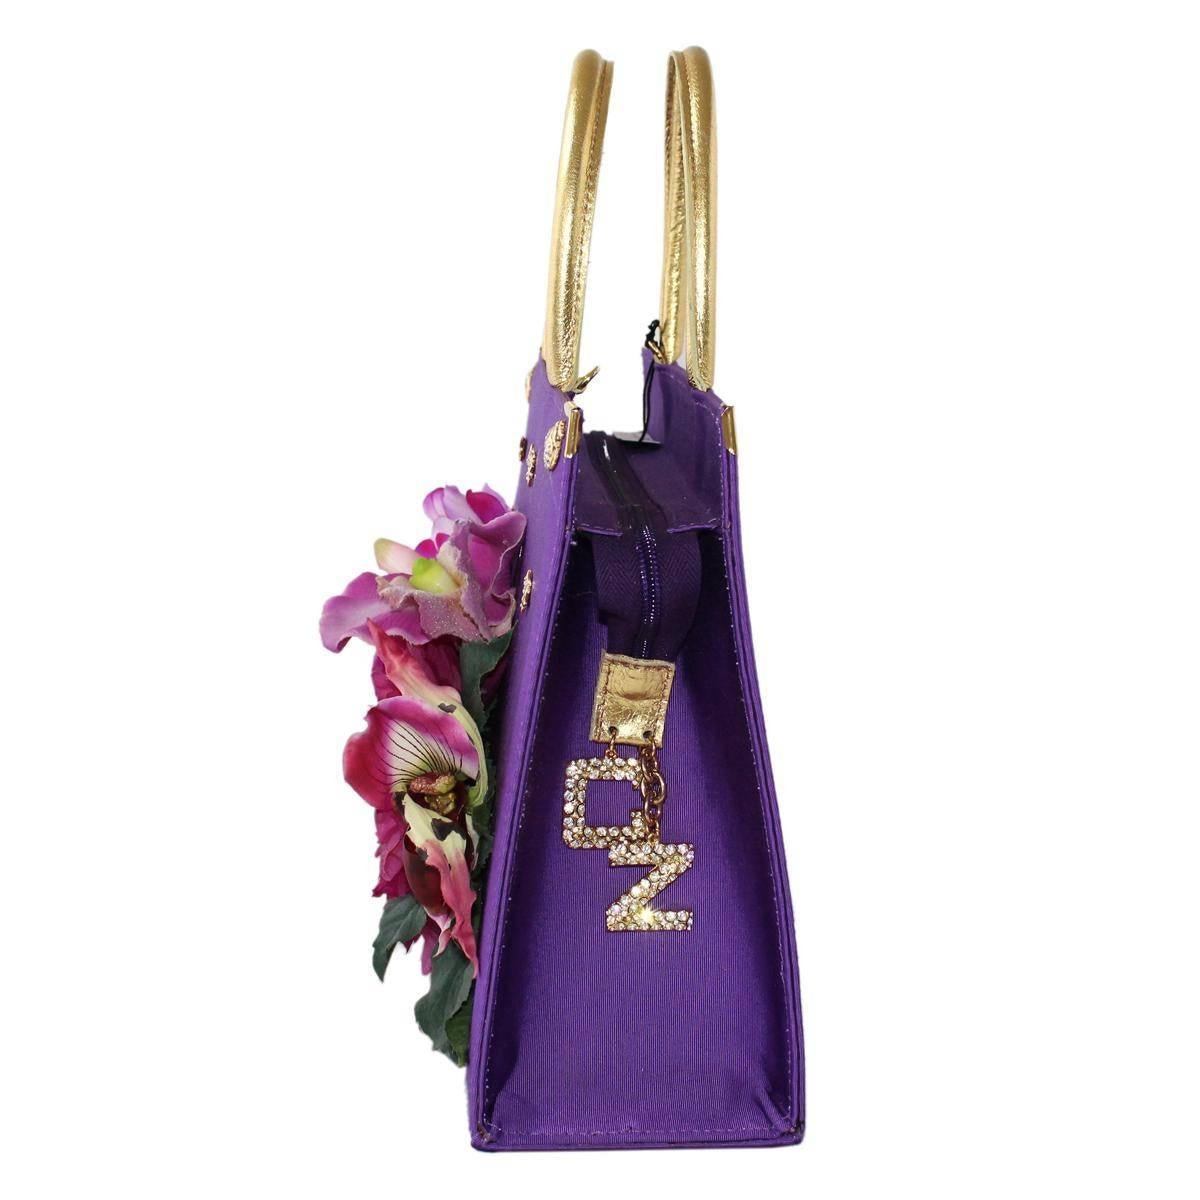 Funny and very original bag by Carlo Zini Milano
One of the world's greatest bijoux desigers
Textile
Purple color
Wonderful textile application, with golden metal and swarovsky 
Floral theme
Golden leather handles
Zip closure
Internal zip pocket
Can